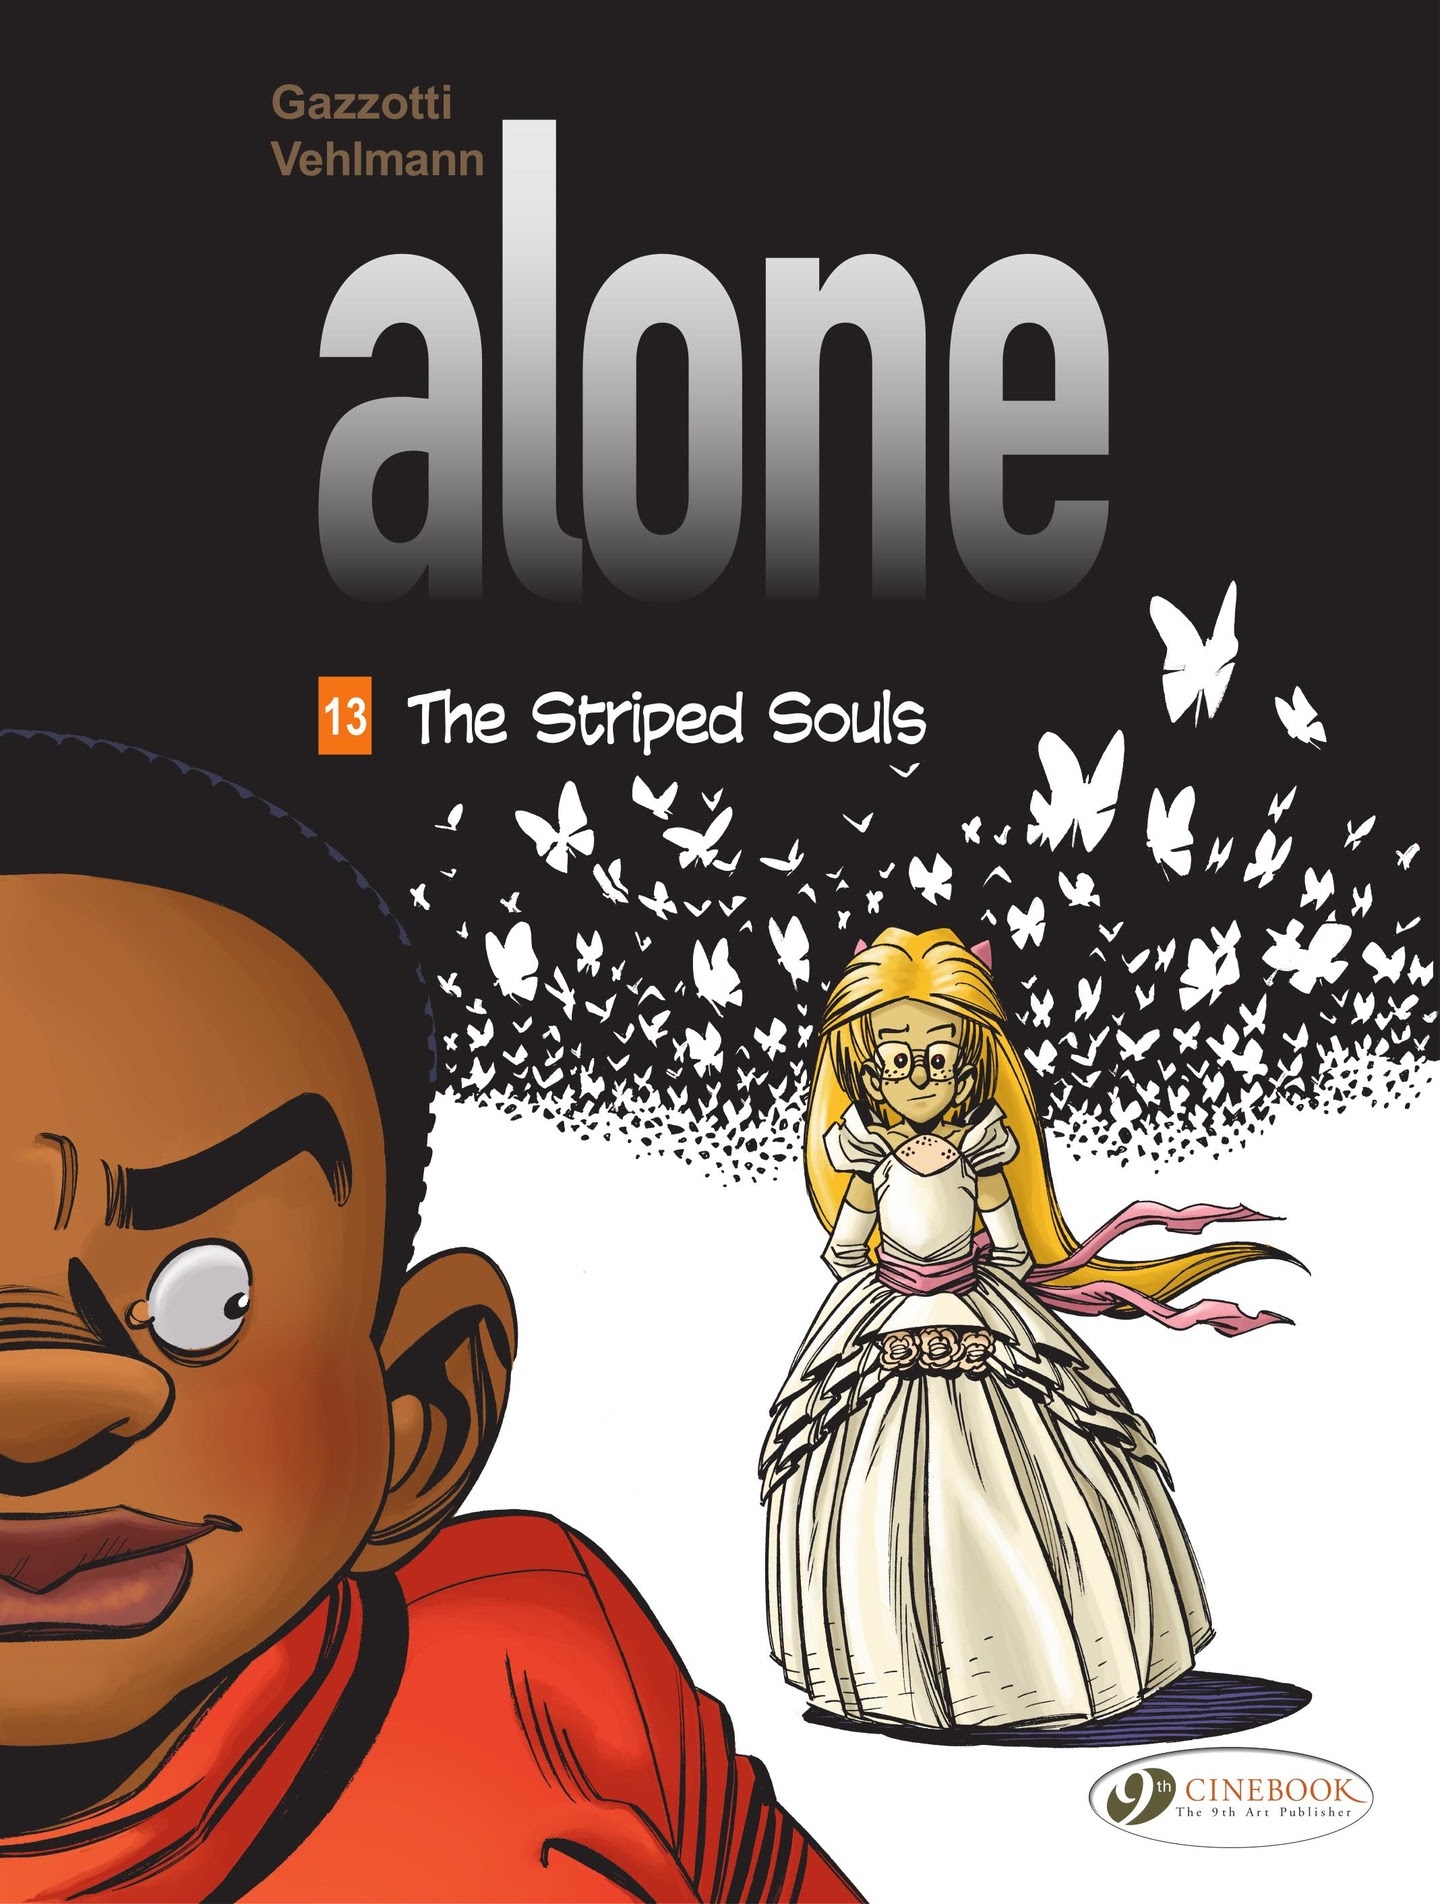 Read online Alone comic -  Issue #13 - 1